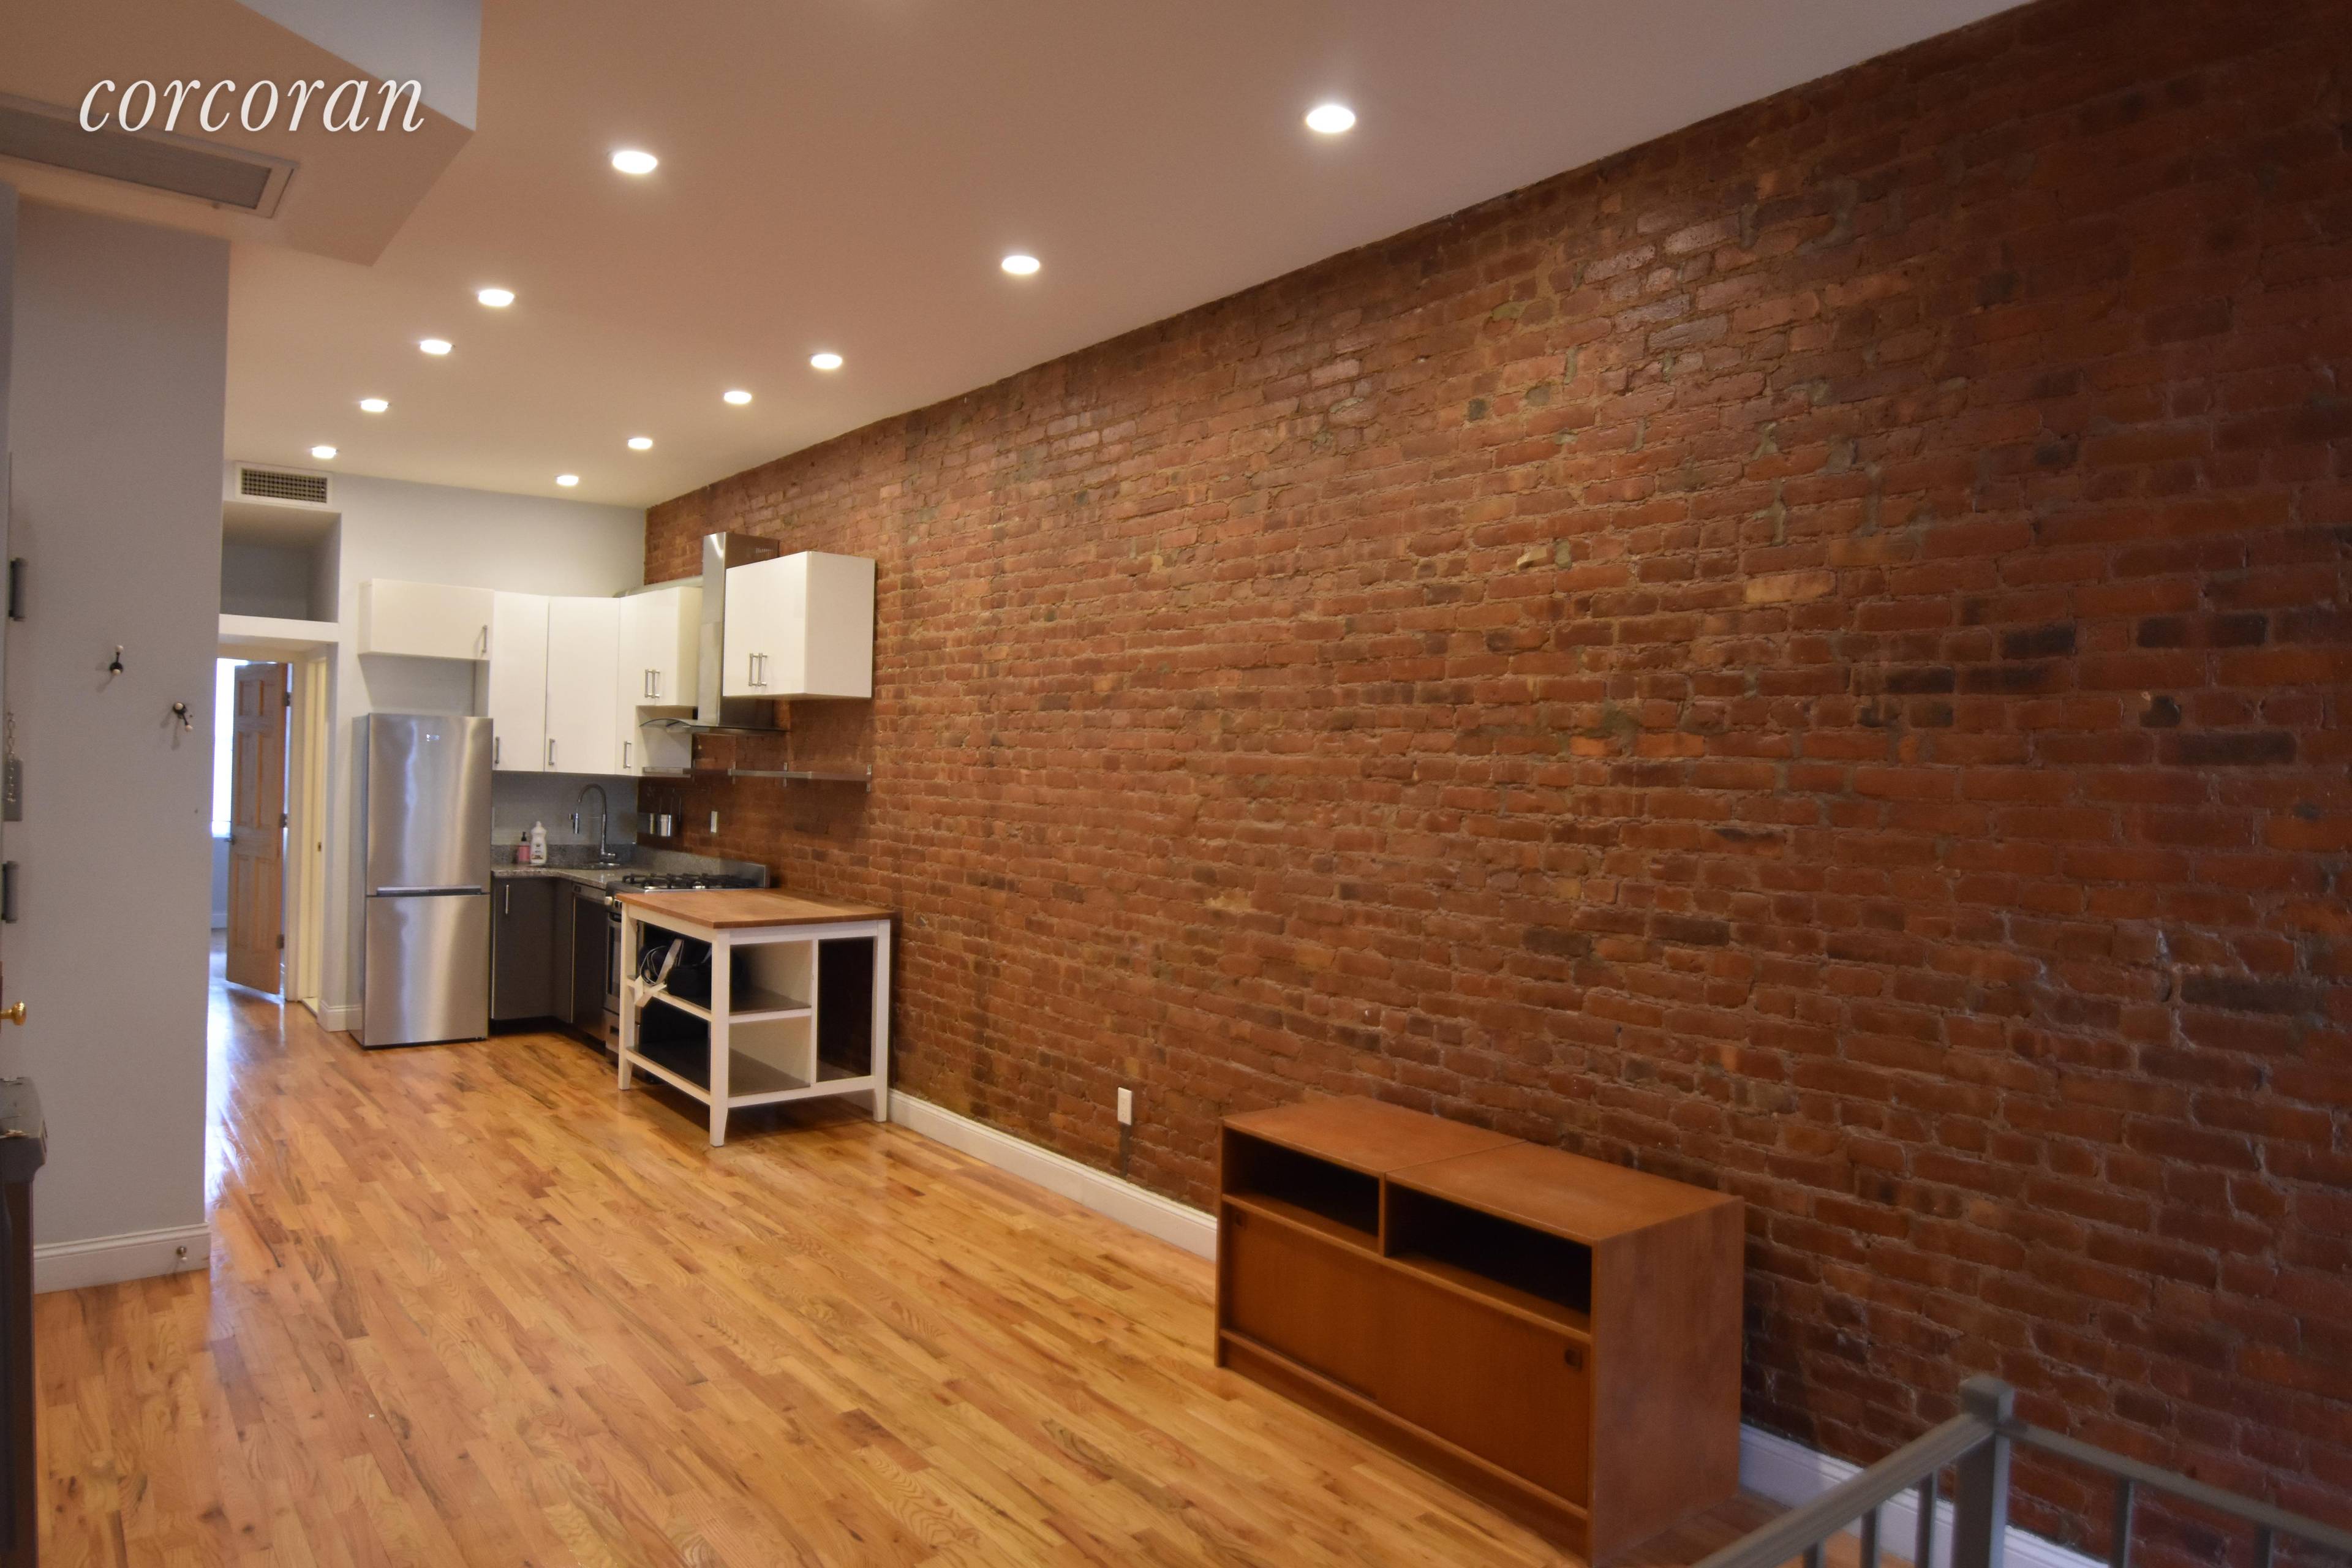 245 Kingsland Ave is a Turn key Multi Unit Brick Building Situated on a wide, beautiful tree lined street in Greenpoint near McGolrick Park.